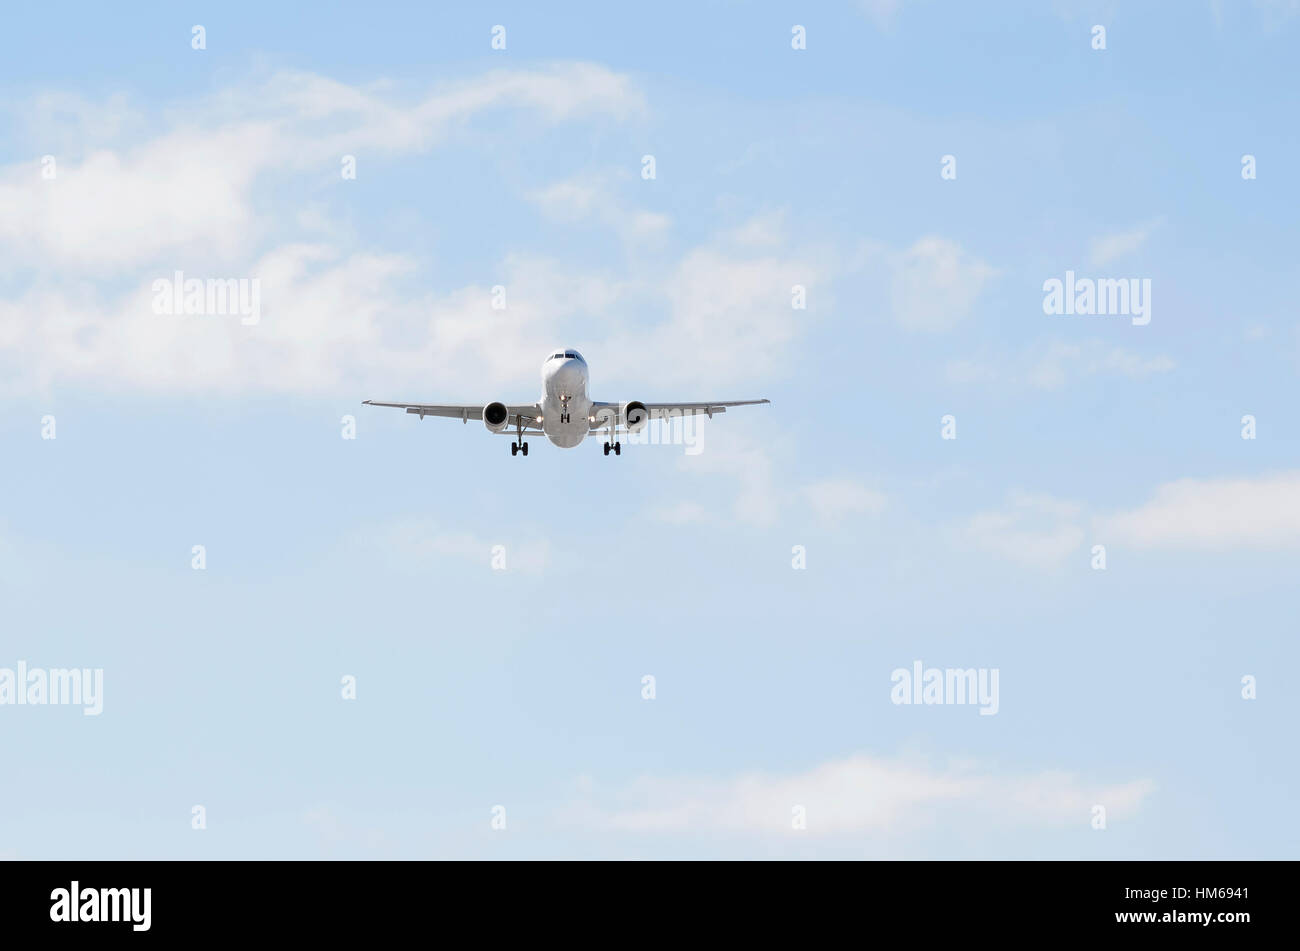 Airplane Airbus A320, of Iberia airline. Blue sky with some clouds. Stock Photo